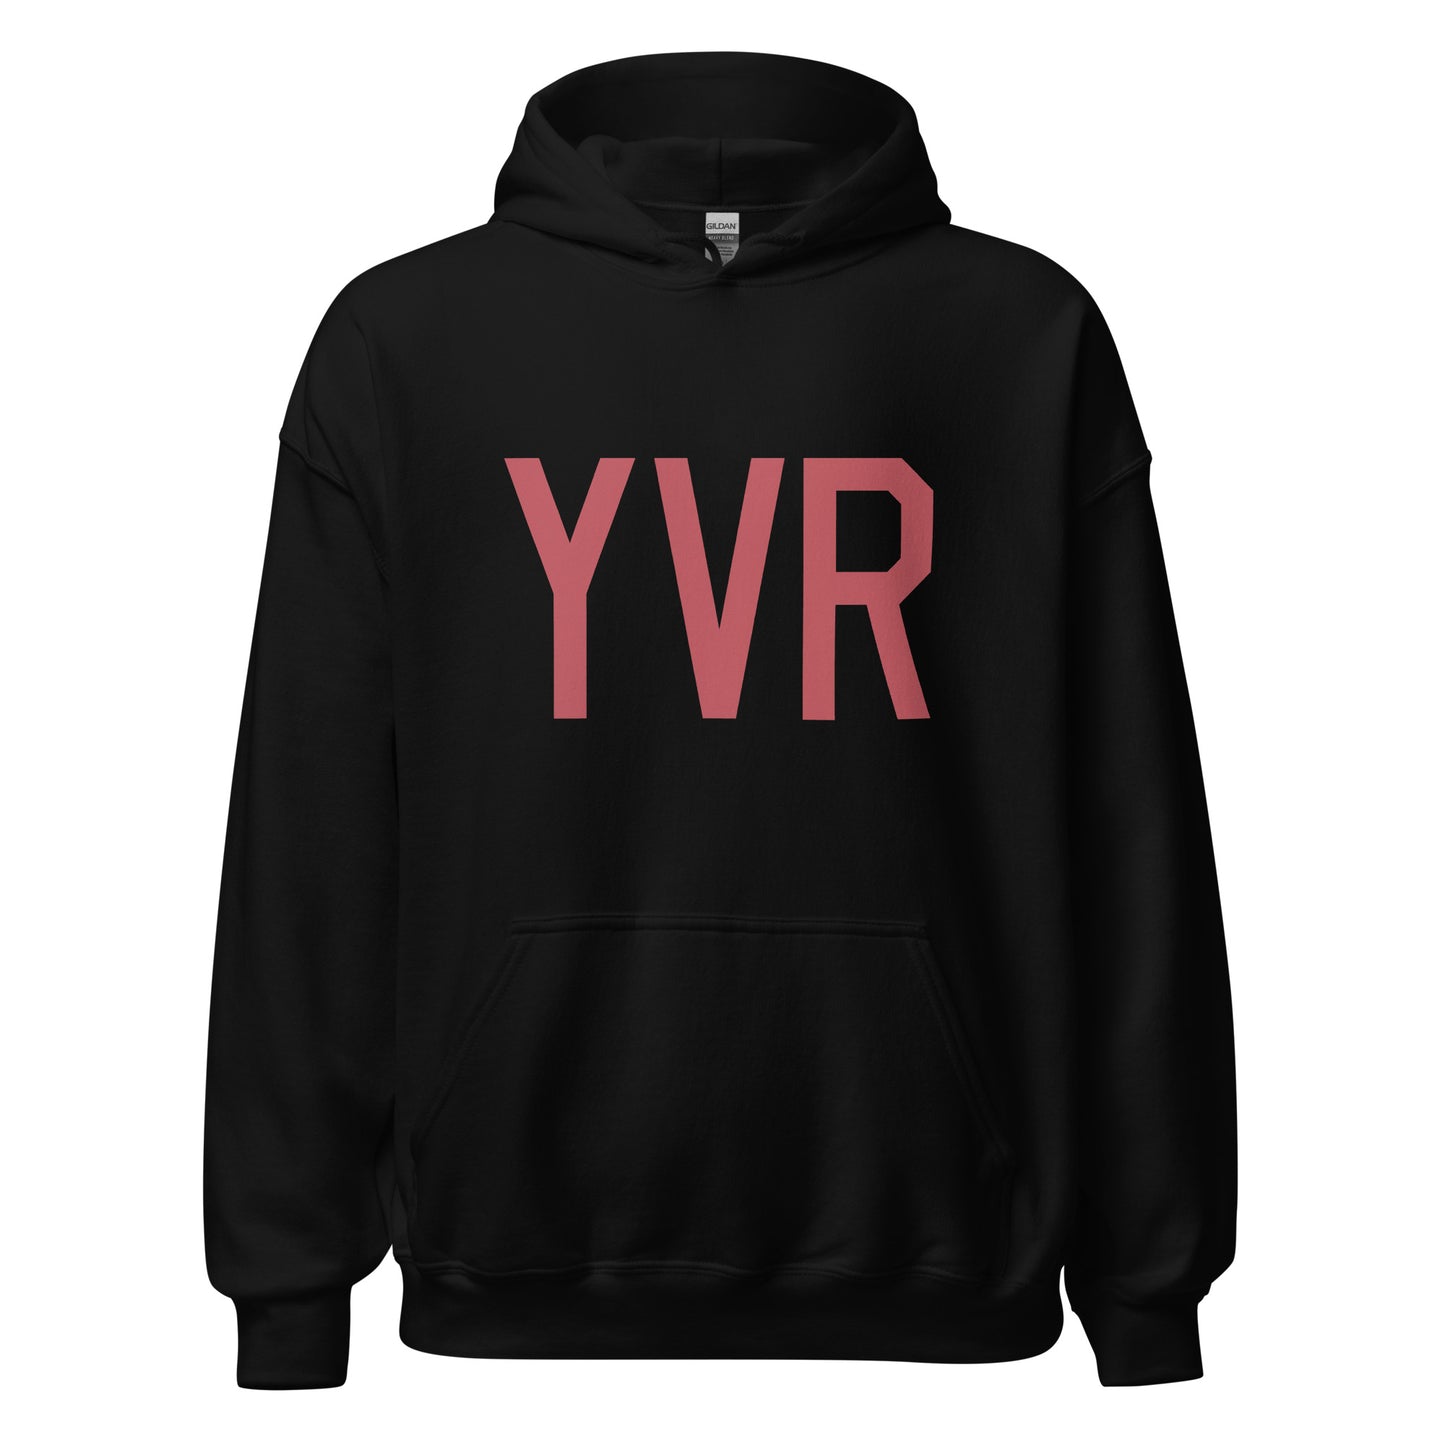 Aviation Enthusiast Hoodie - Deep Pink Graphic • YVR Vancouver • YHM Designs - Image 03